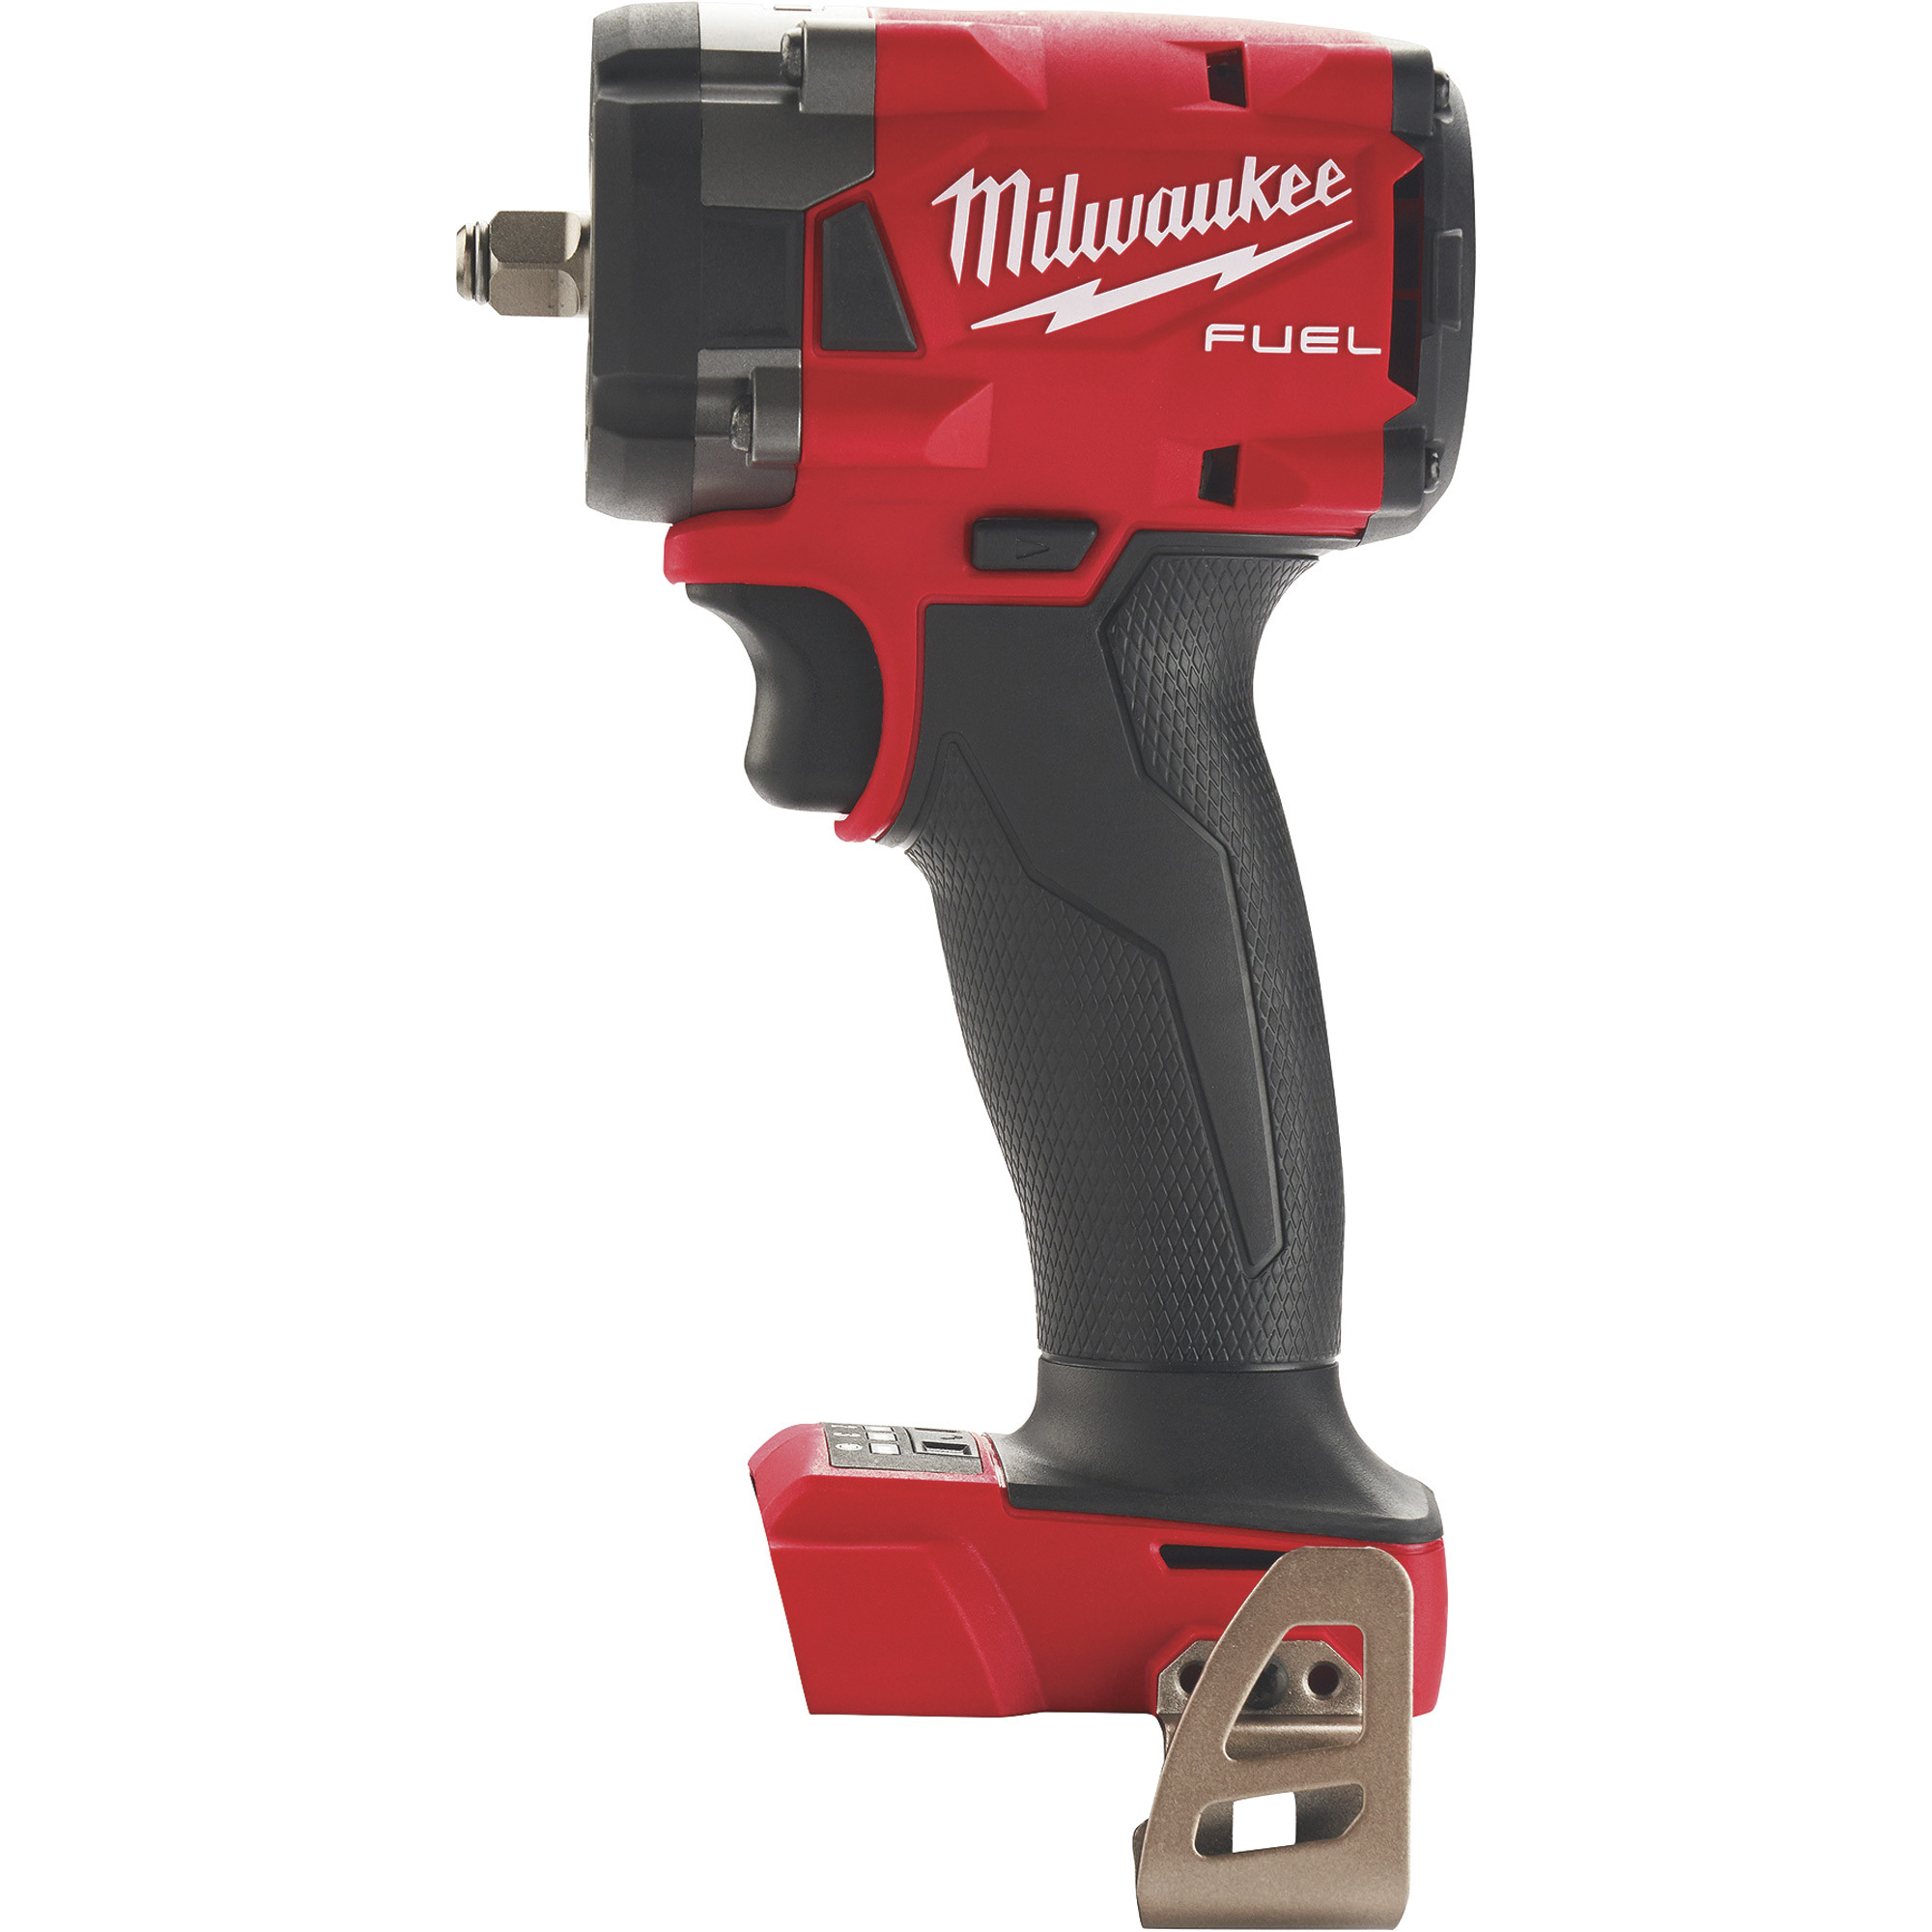 M18 FUEL Cordless Compact Impact Wrench with Friction Ring — Tool Only, 3/8Inch Drive, 250 Ft./Lbs. Torque, Model - Milwaukee 2854-20